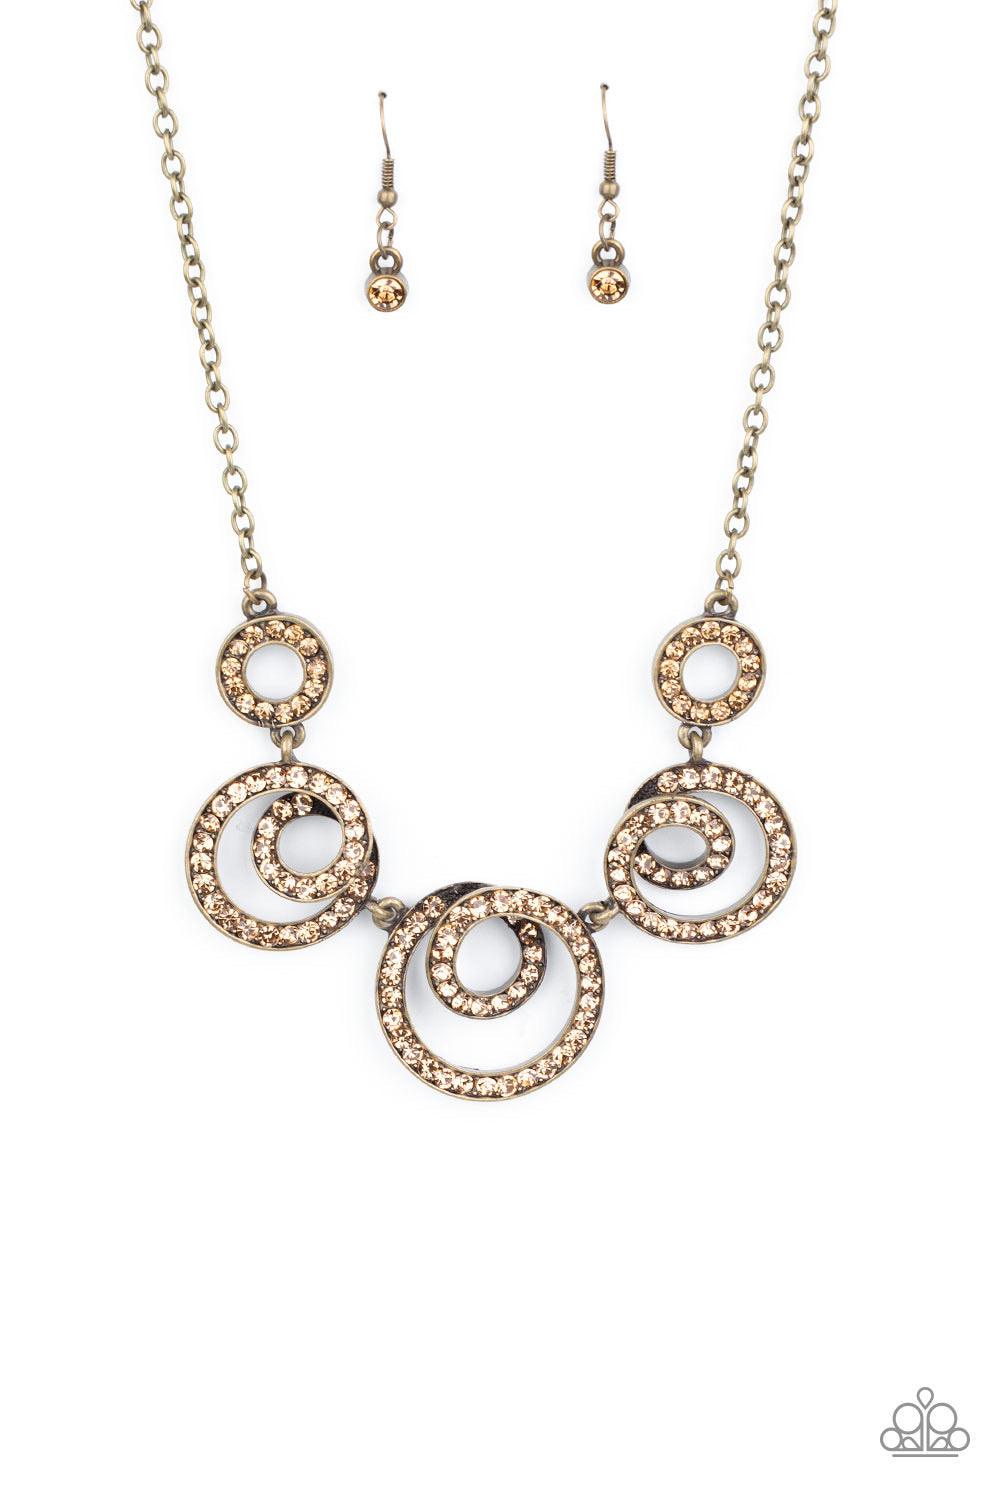 Paparazzi Accessories Total Head-Turner - Brass Encrusted in glassy topaz rhinestones, swirling brass frames delicately connect below the collar for a statement-making finish. Features an adjustable clasp closure. Sold as one individual necklace. Includes